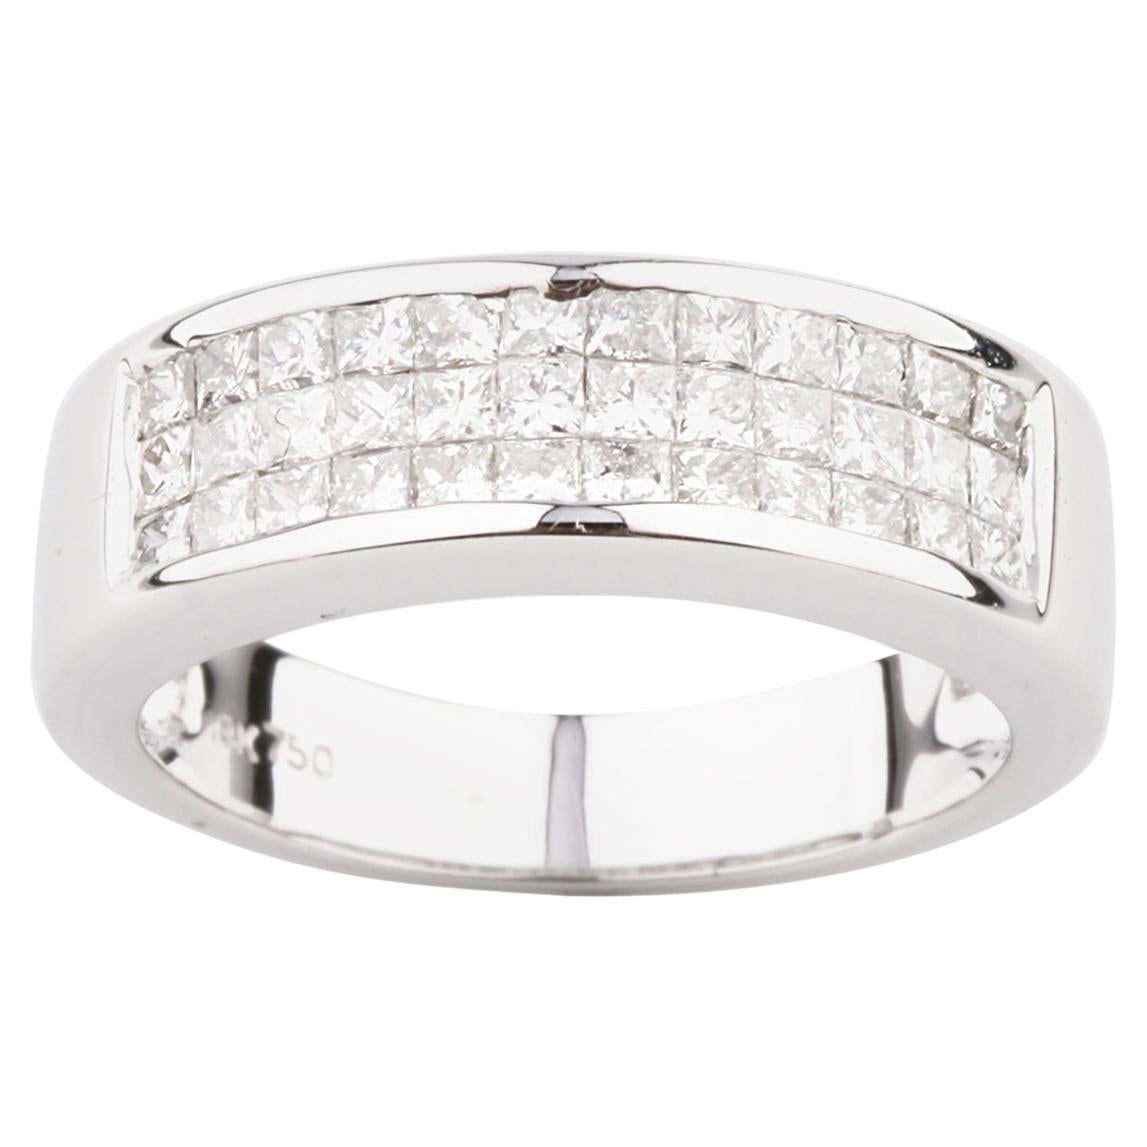 1.10 Carat Princess Diamond Plaque Band Ring in White Gold